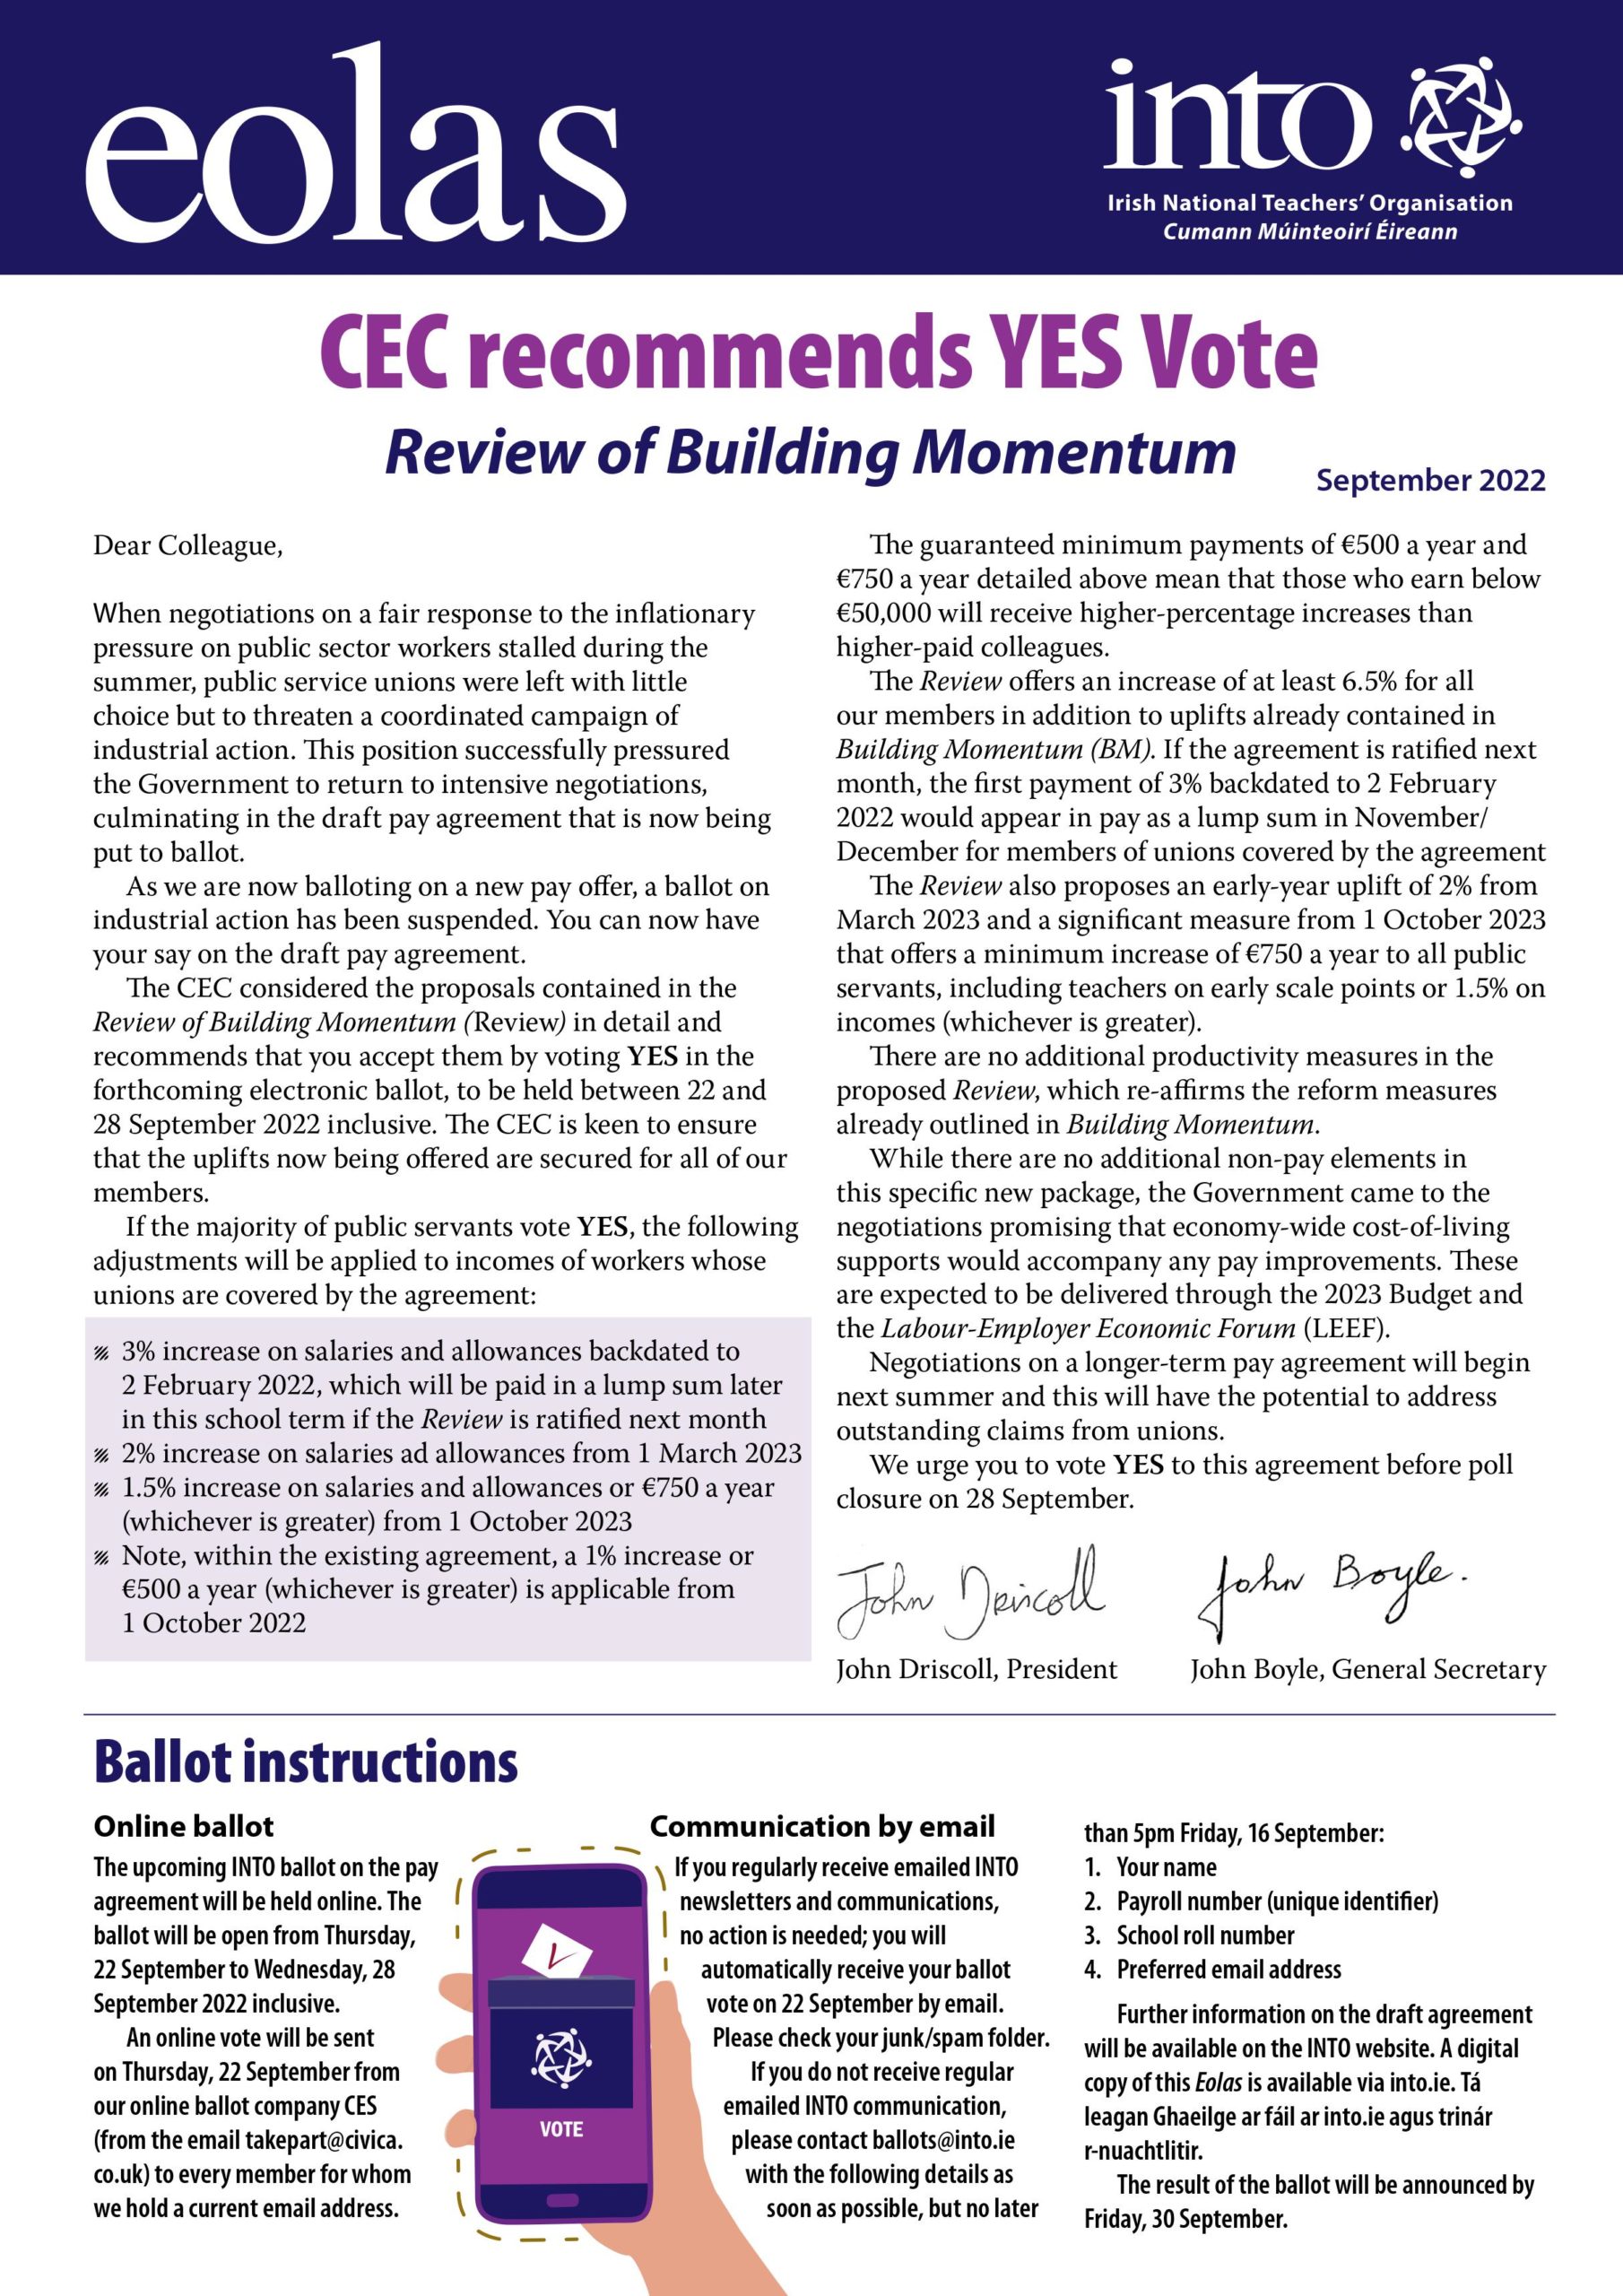 Review of Building Momentum – CEC recommends YES Vote